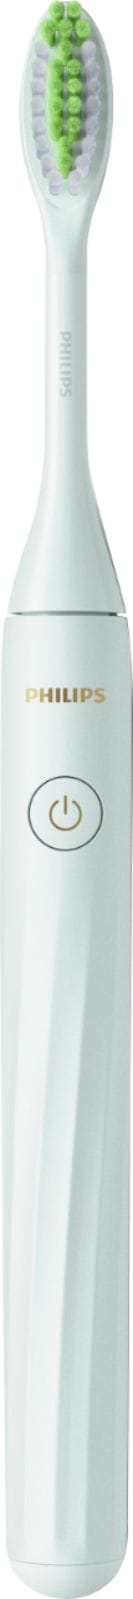 Philips Sonicare - Philips One by Sonicare Battery Toothbrush - Mint_1